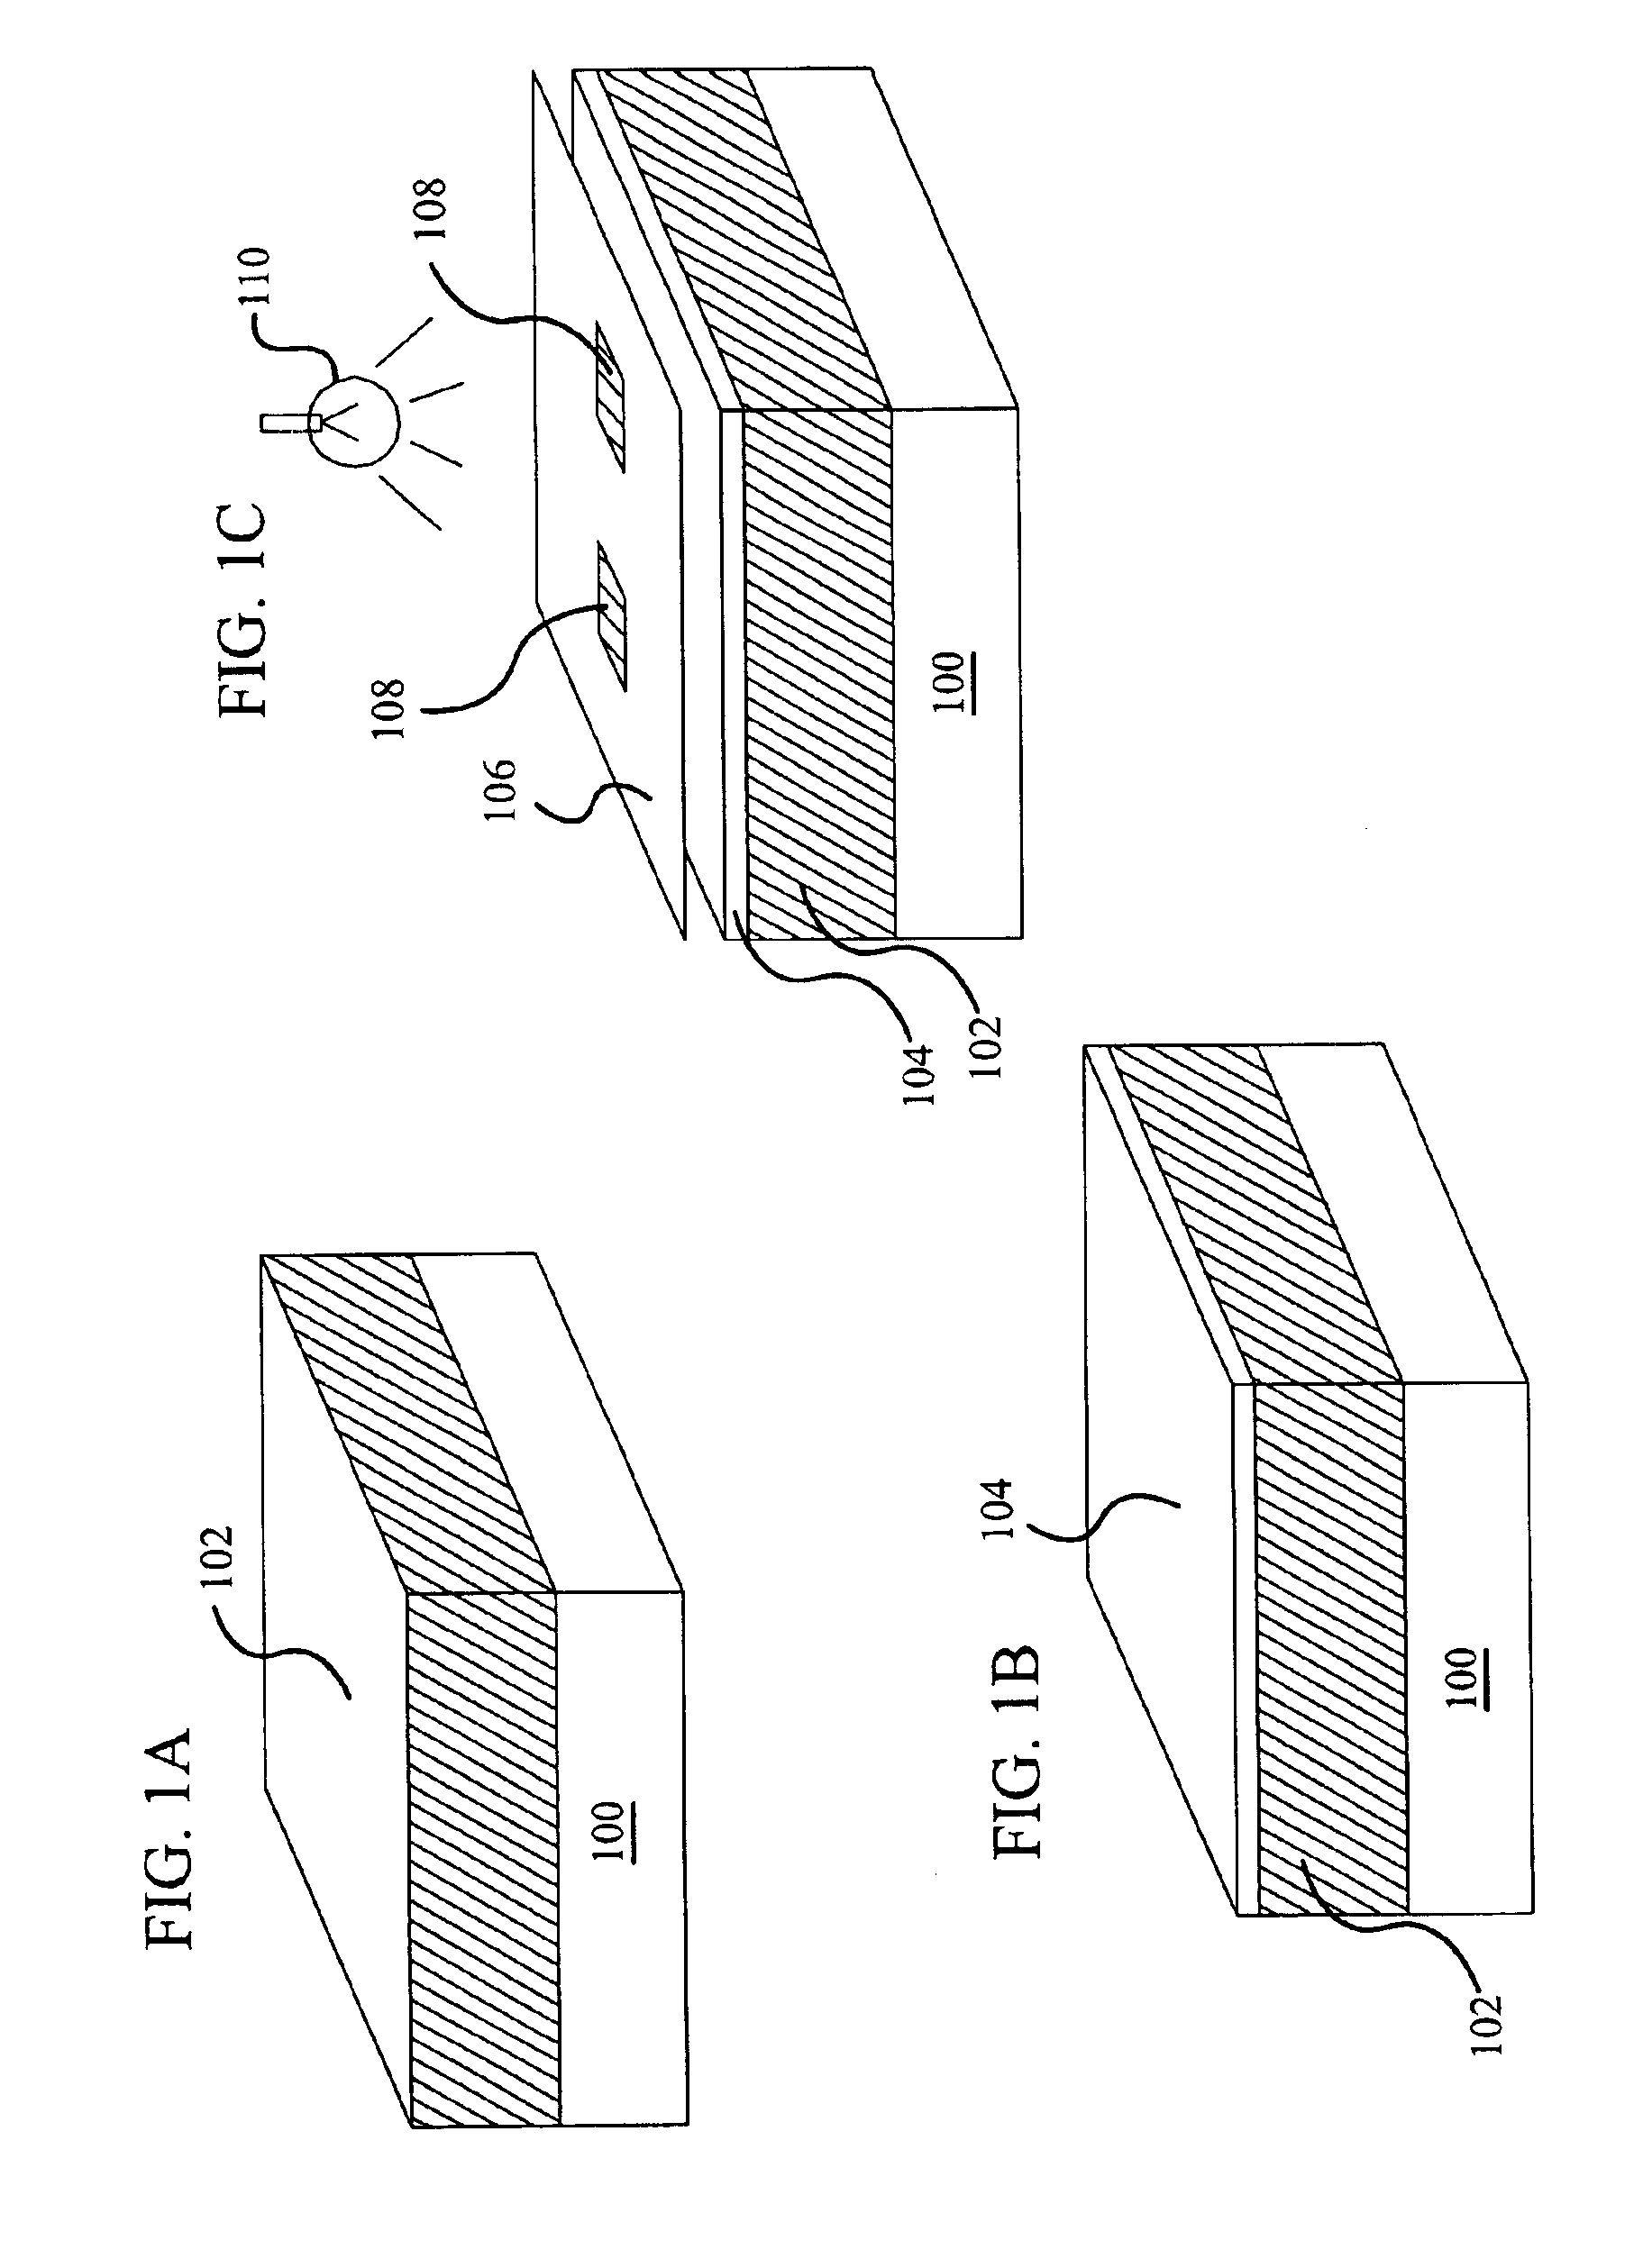 Process for making angled features for nanolithography and nanoimprinting